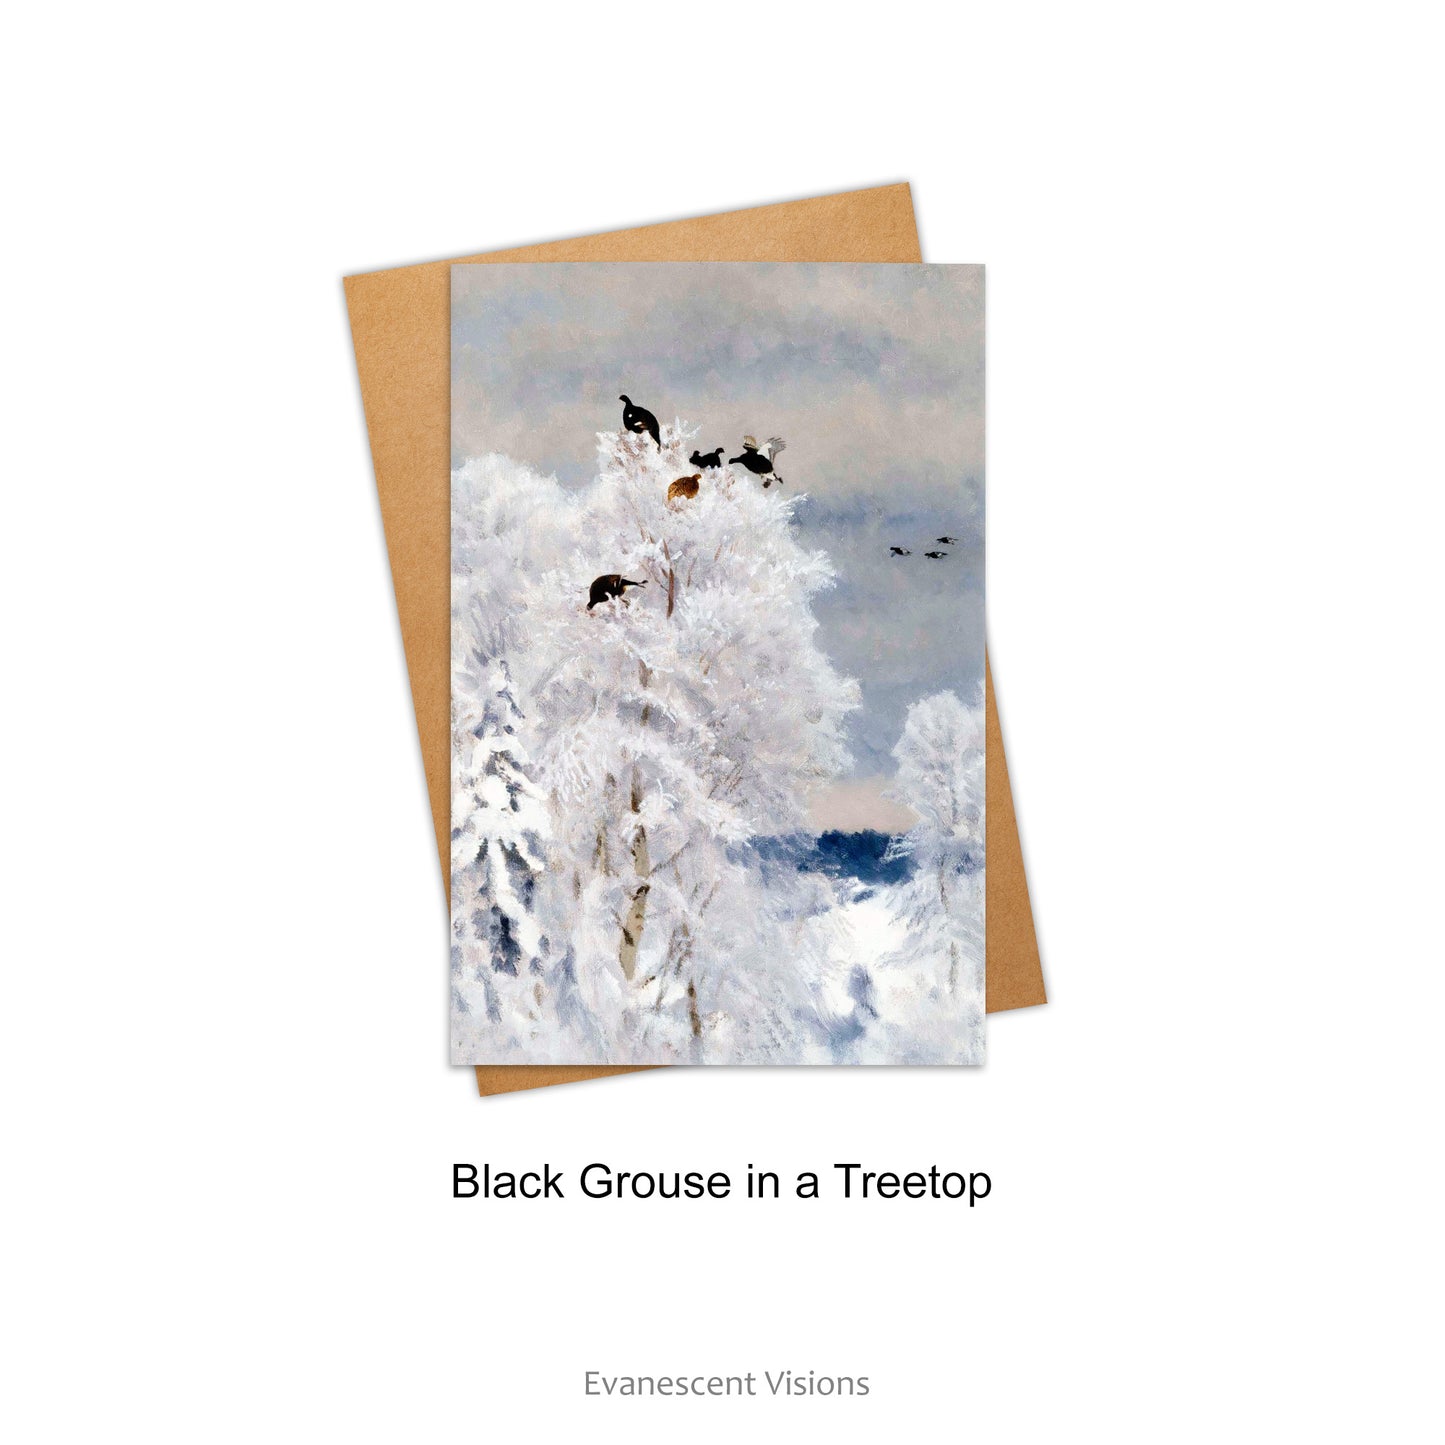 Snowy Winter Scenes art cards with Black Grouse in a Treetop design.